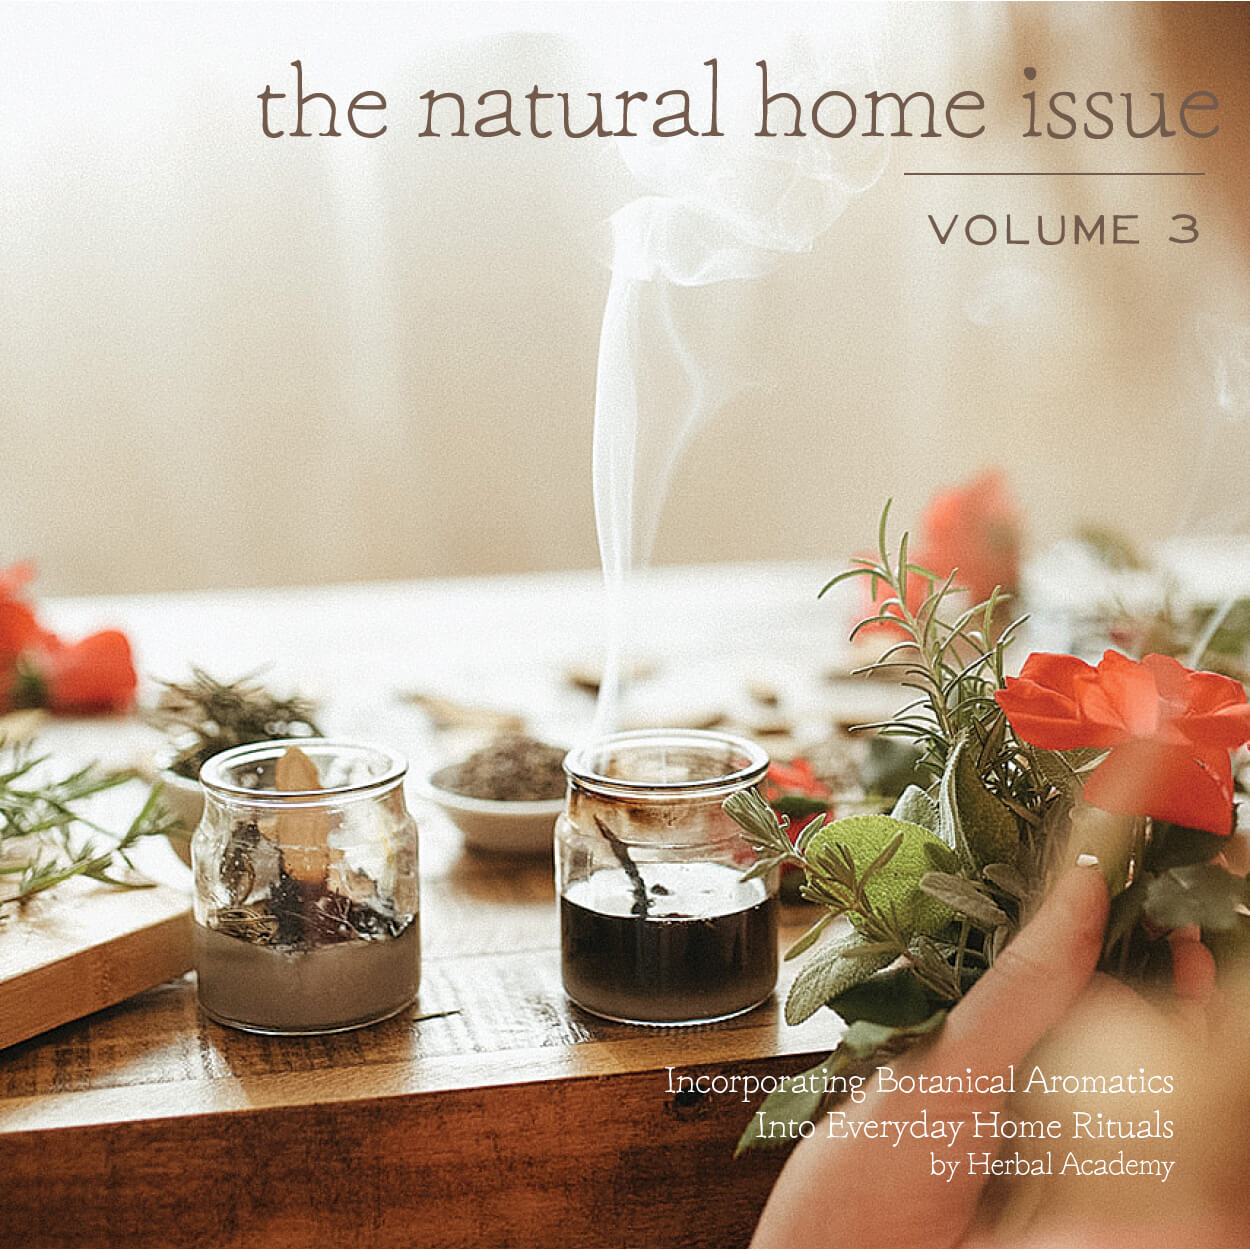 The Natural Home Issue